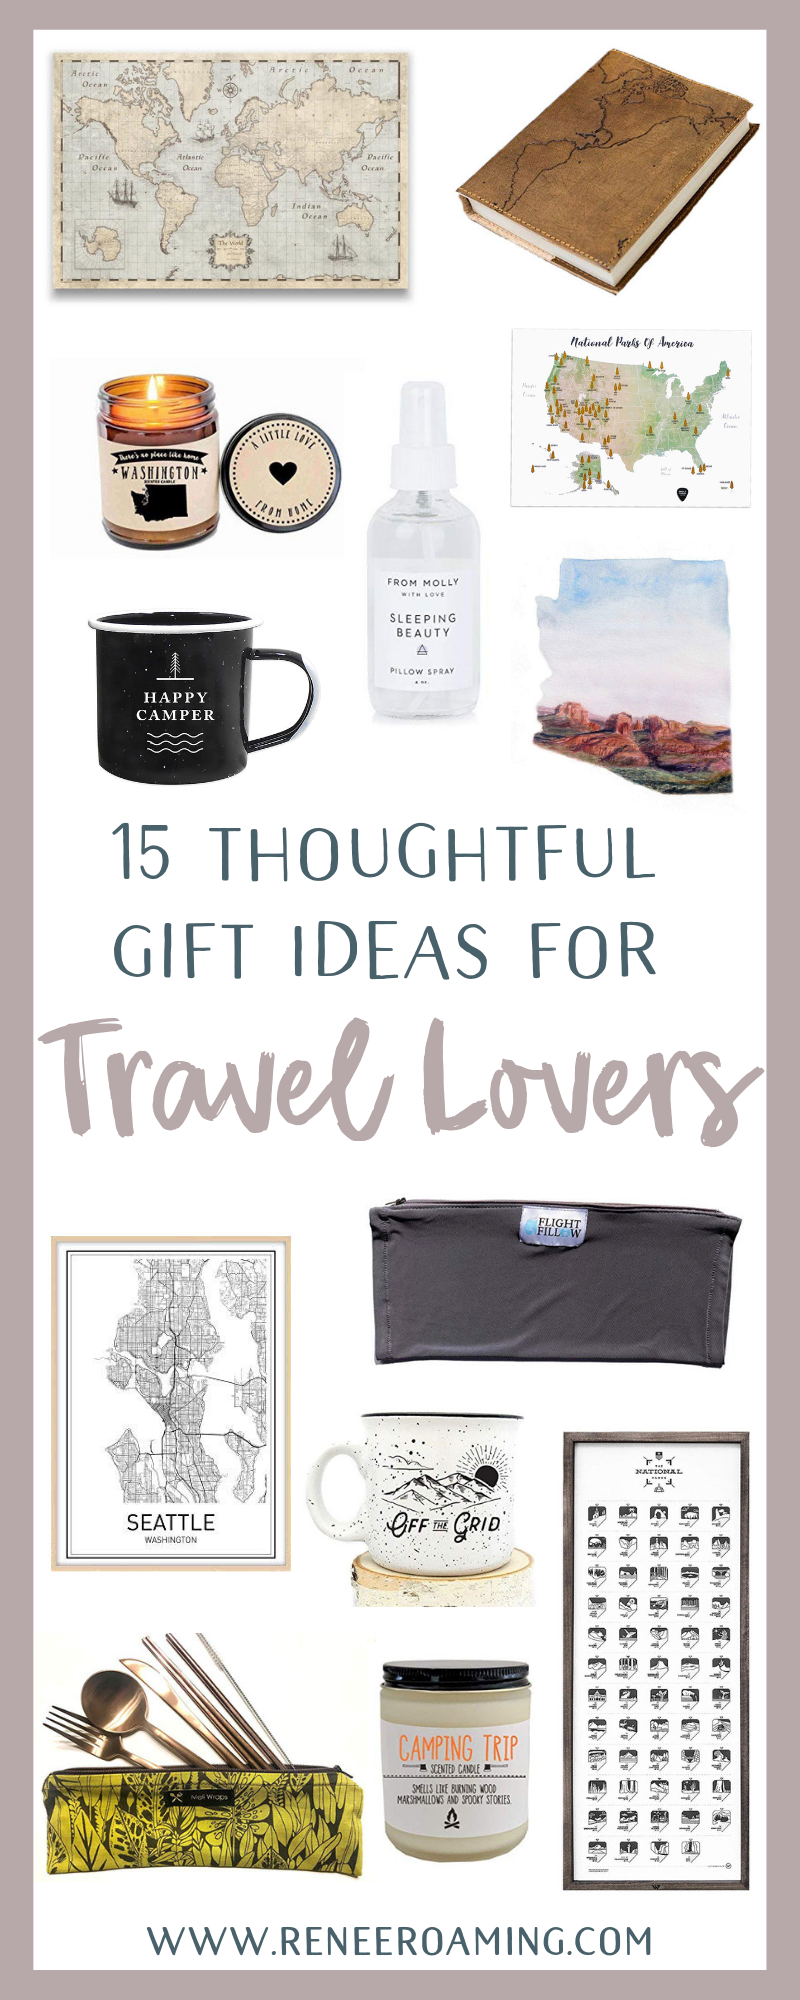 15 Thoughtful Gift Ideas For Travel Lovers - Renee Roaming - PIN (1)